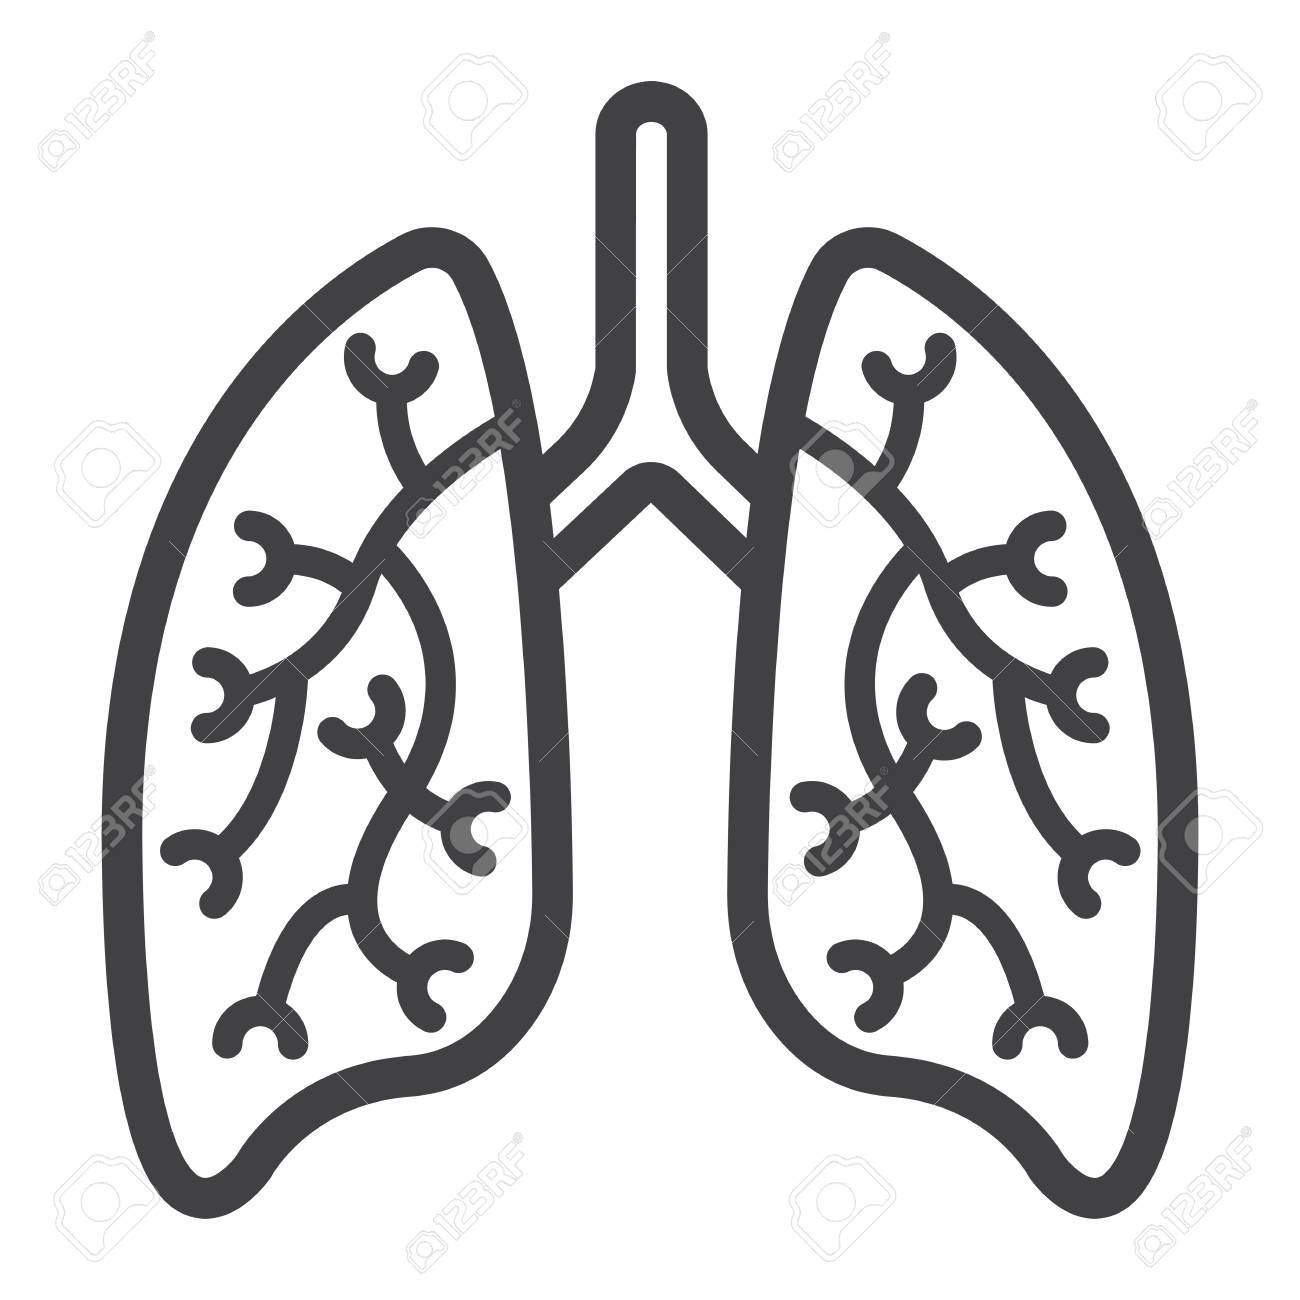 lungs clipart black and white